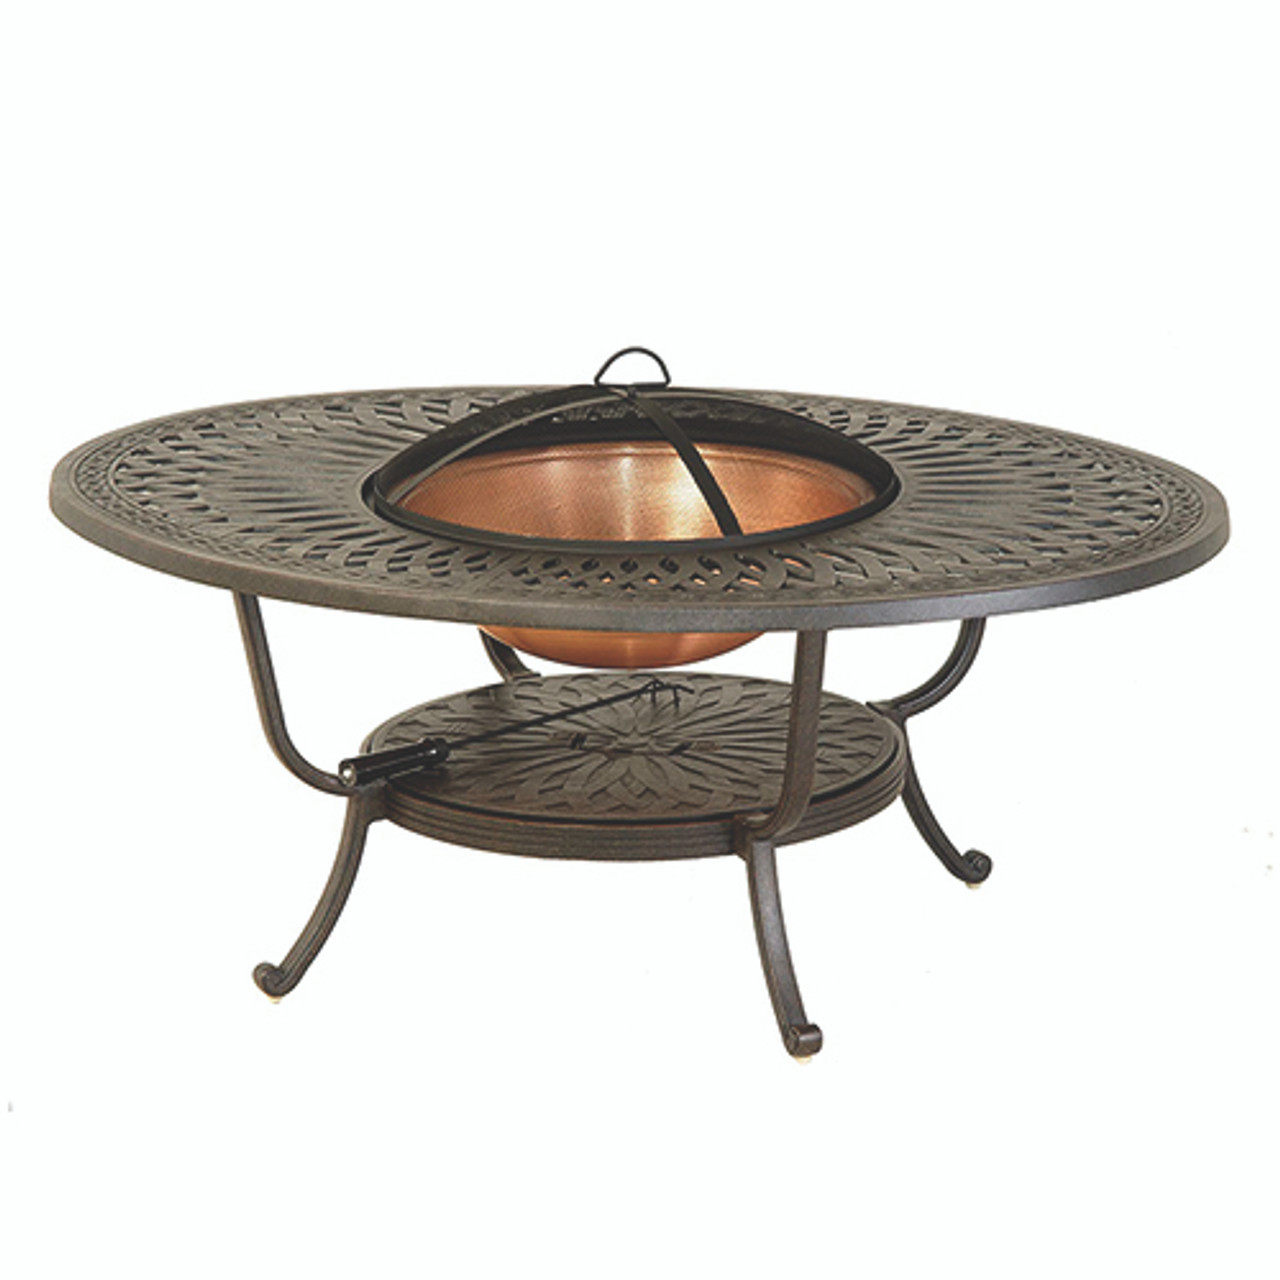 Hanamint Mayfair Oval Fire Pit Table Southern Outdoor Furniture